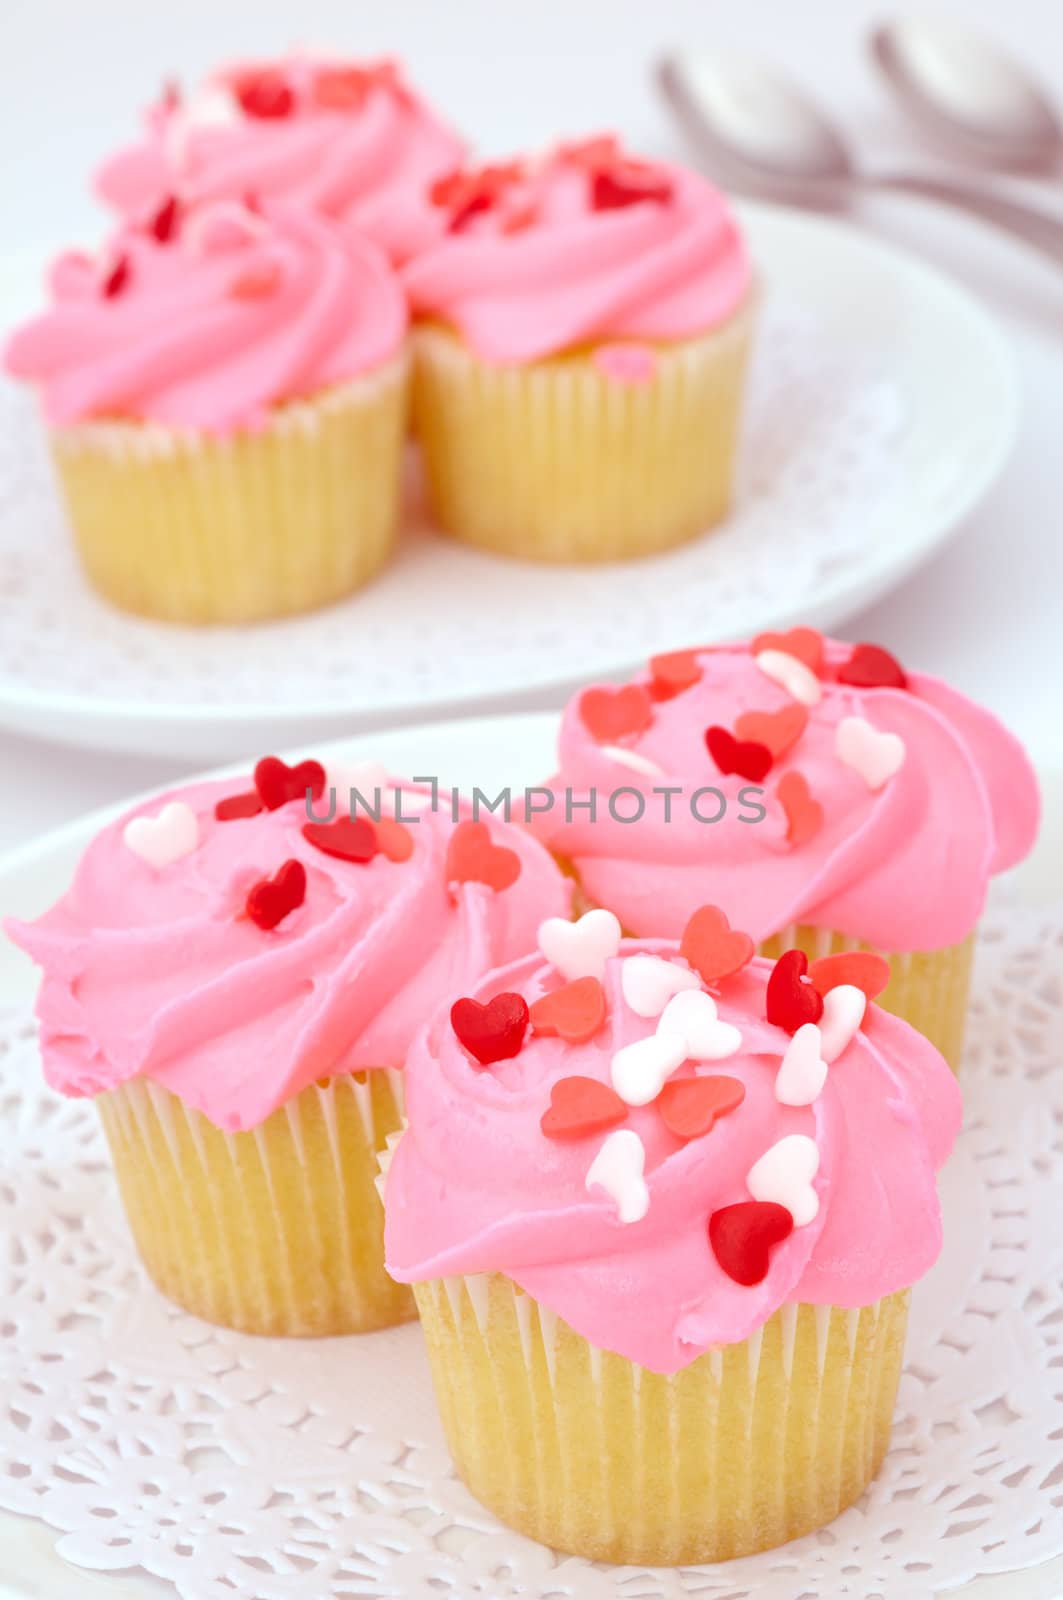 Small pink cupcakes decorated with heart candies